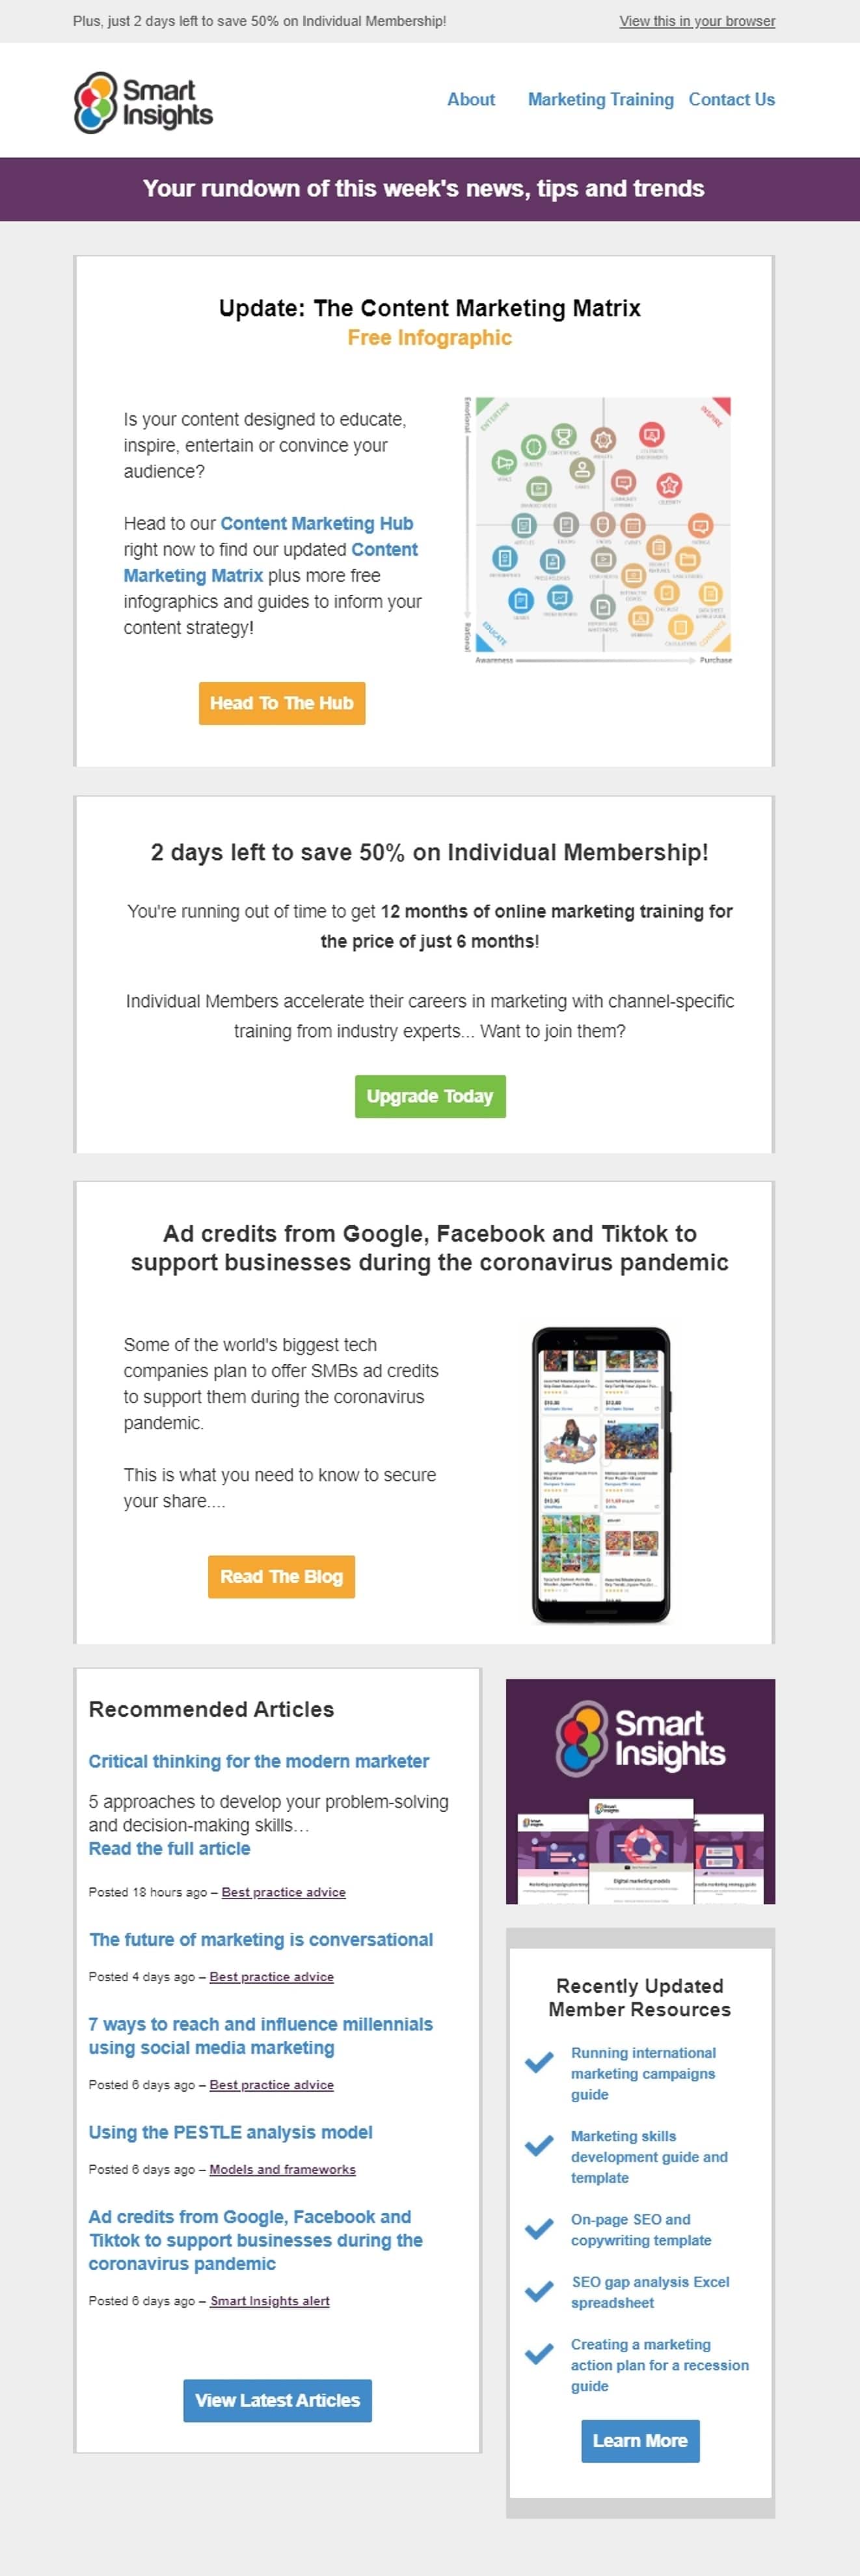 Email newsletter body copy example